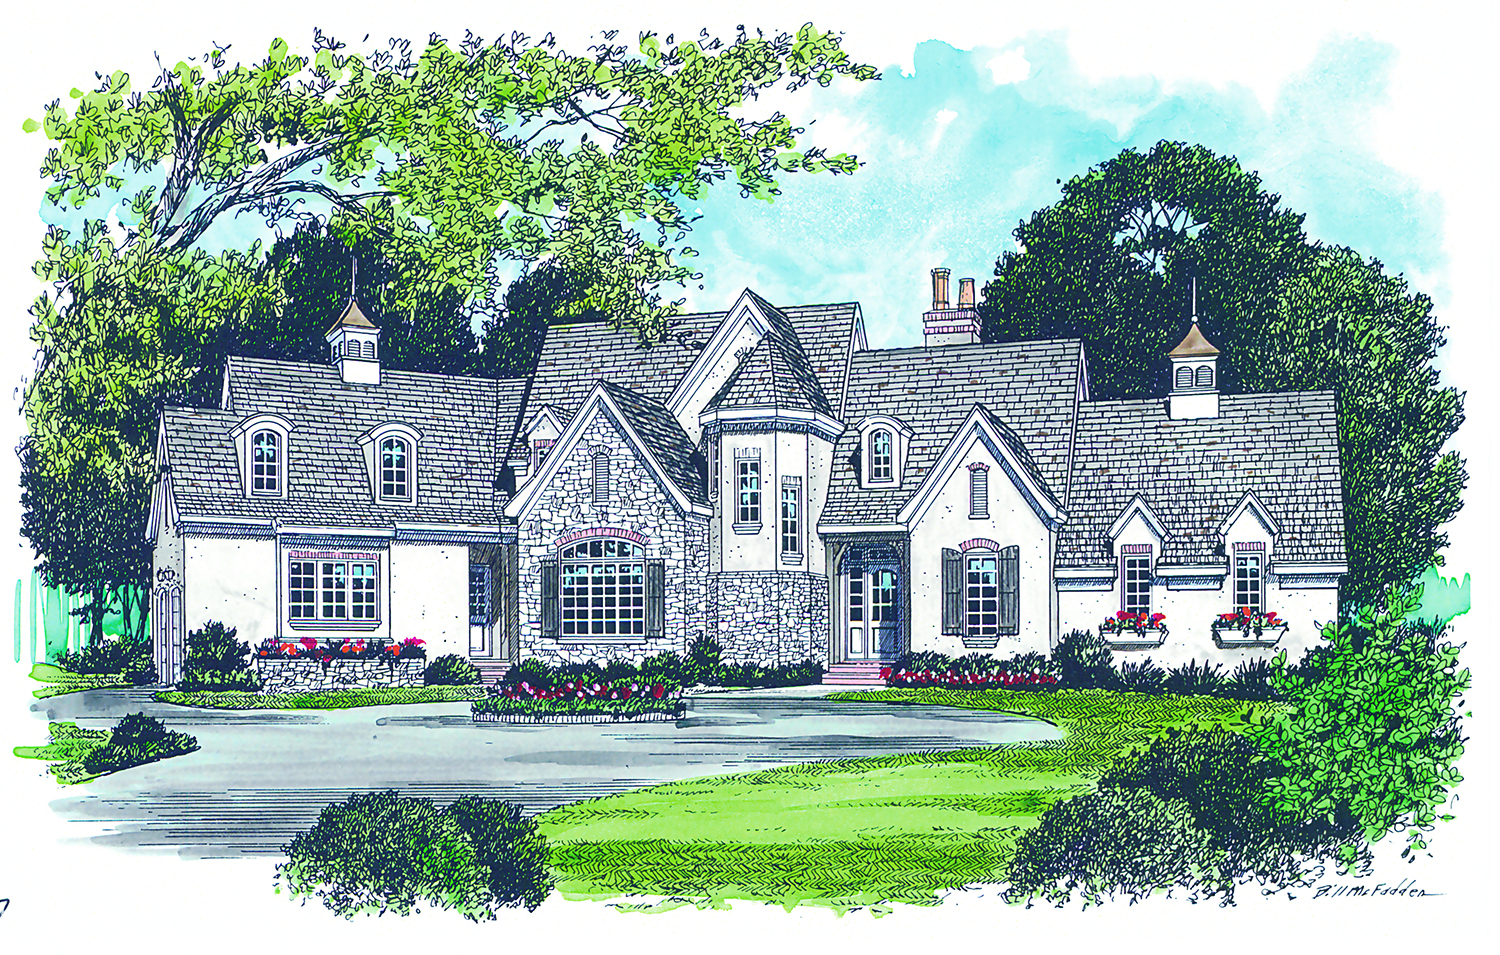 French House Plan #180-1015: 3 Bedrm, 3462 Sq Ft Home | ThePlanCollection